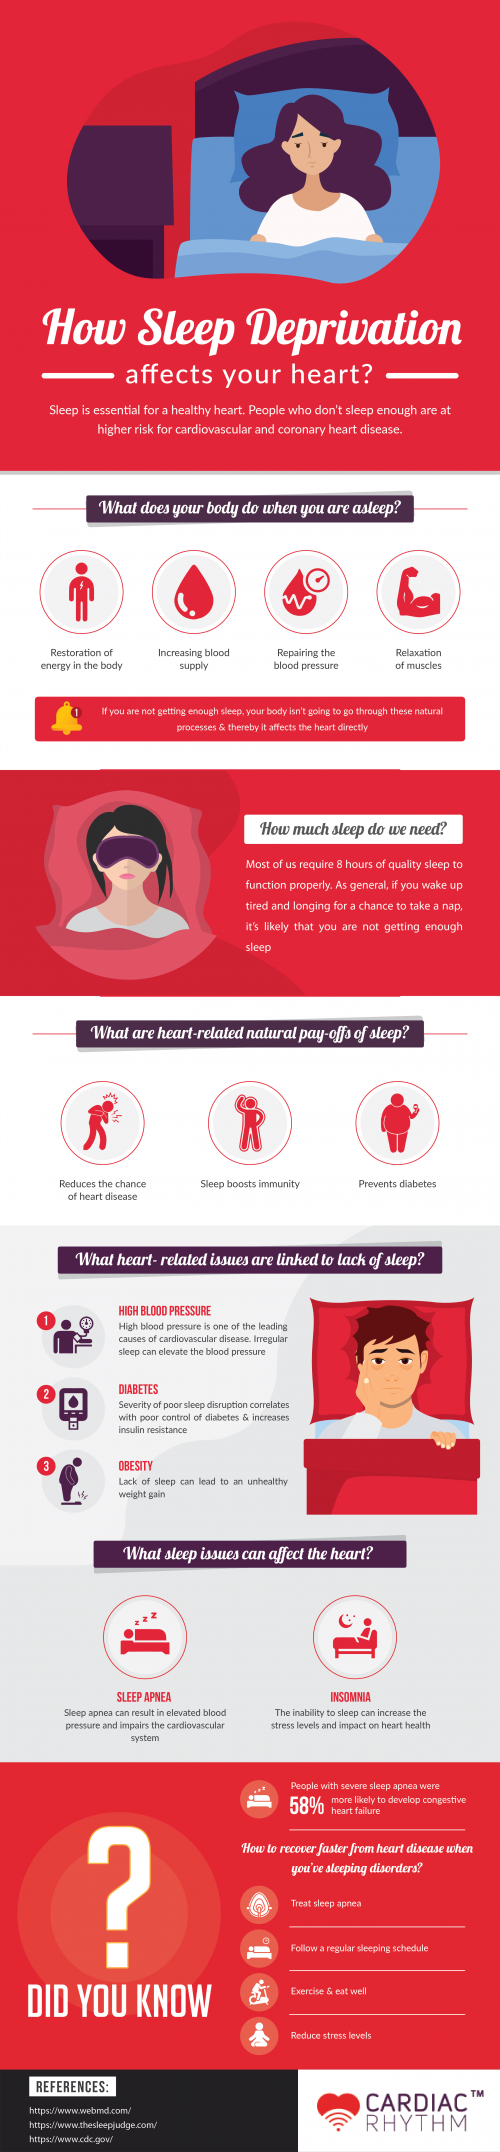 How Sleep Deprivation Affects Your Heart?'